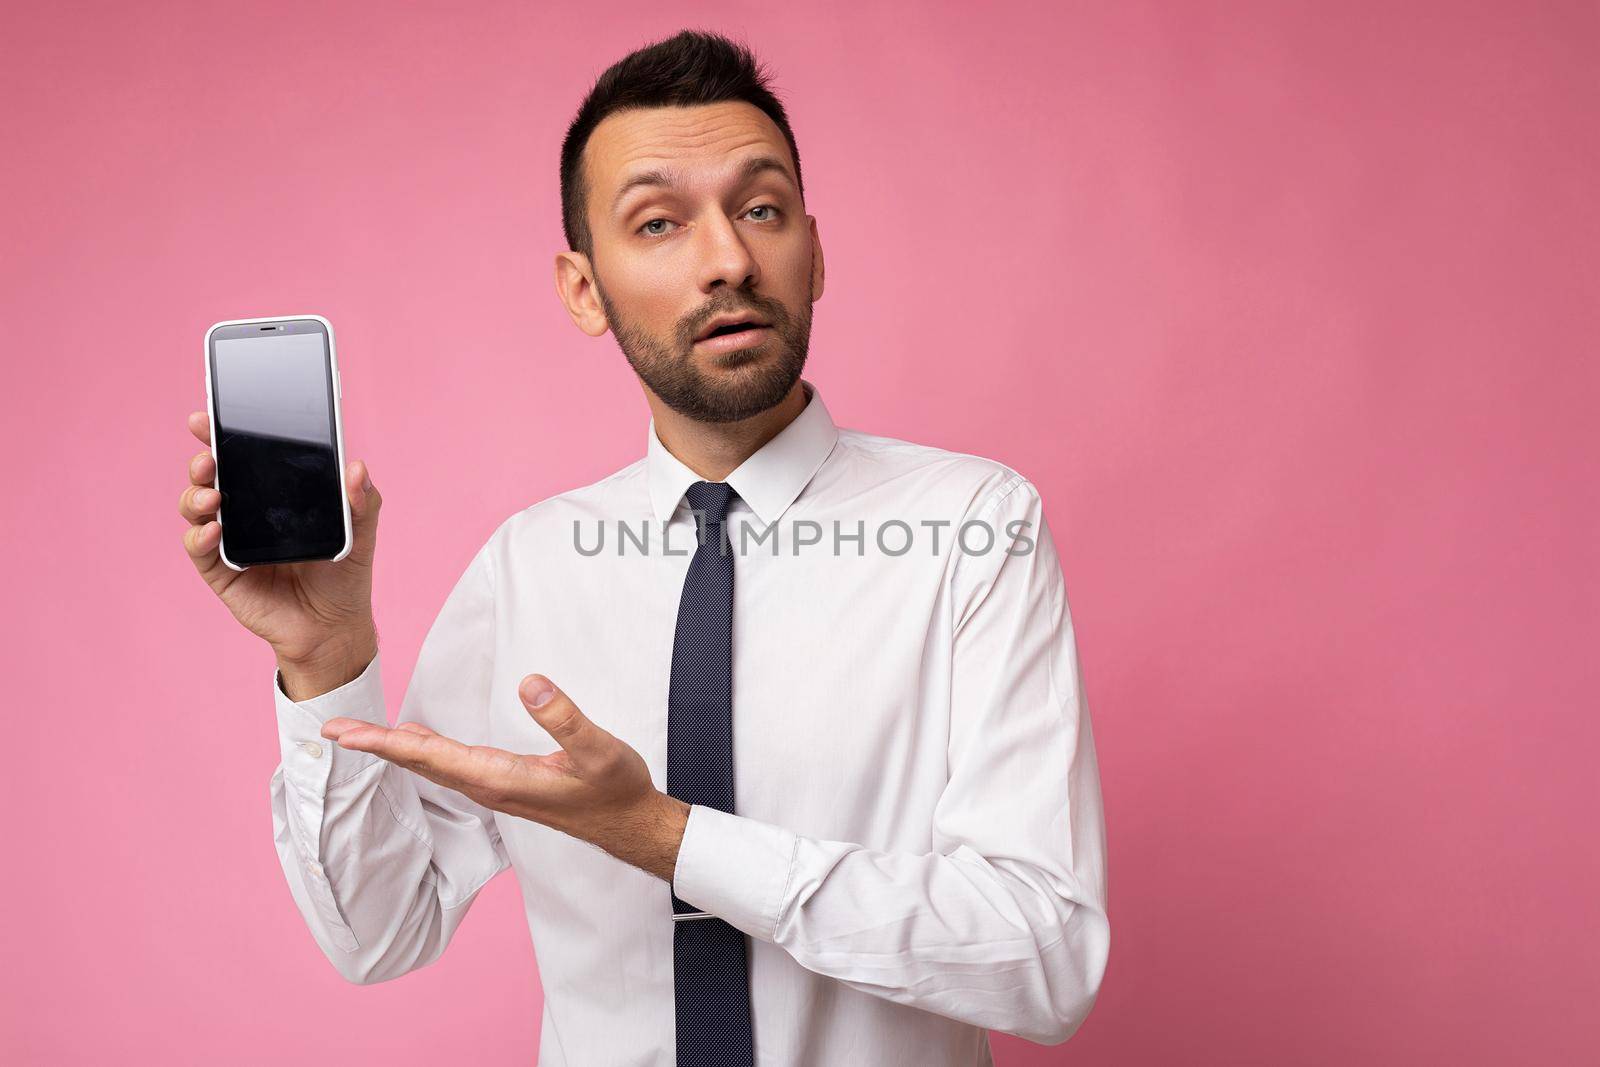 Photo of handsome smiling adult male person good looking wearing casual outfit standing isolated on background with copy space holding smartphone showing phone in hand with empty screen display for mockup pointing at gadjet looking at camera by TRMK